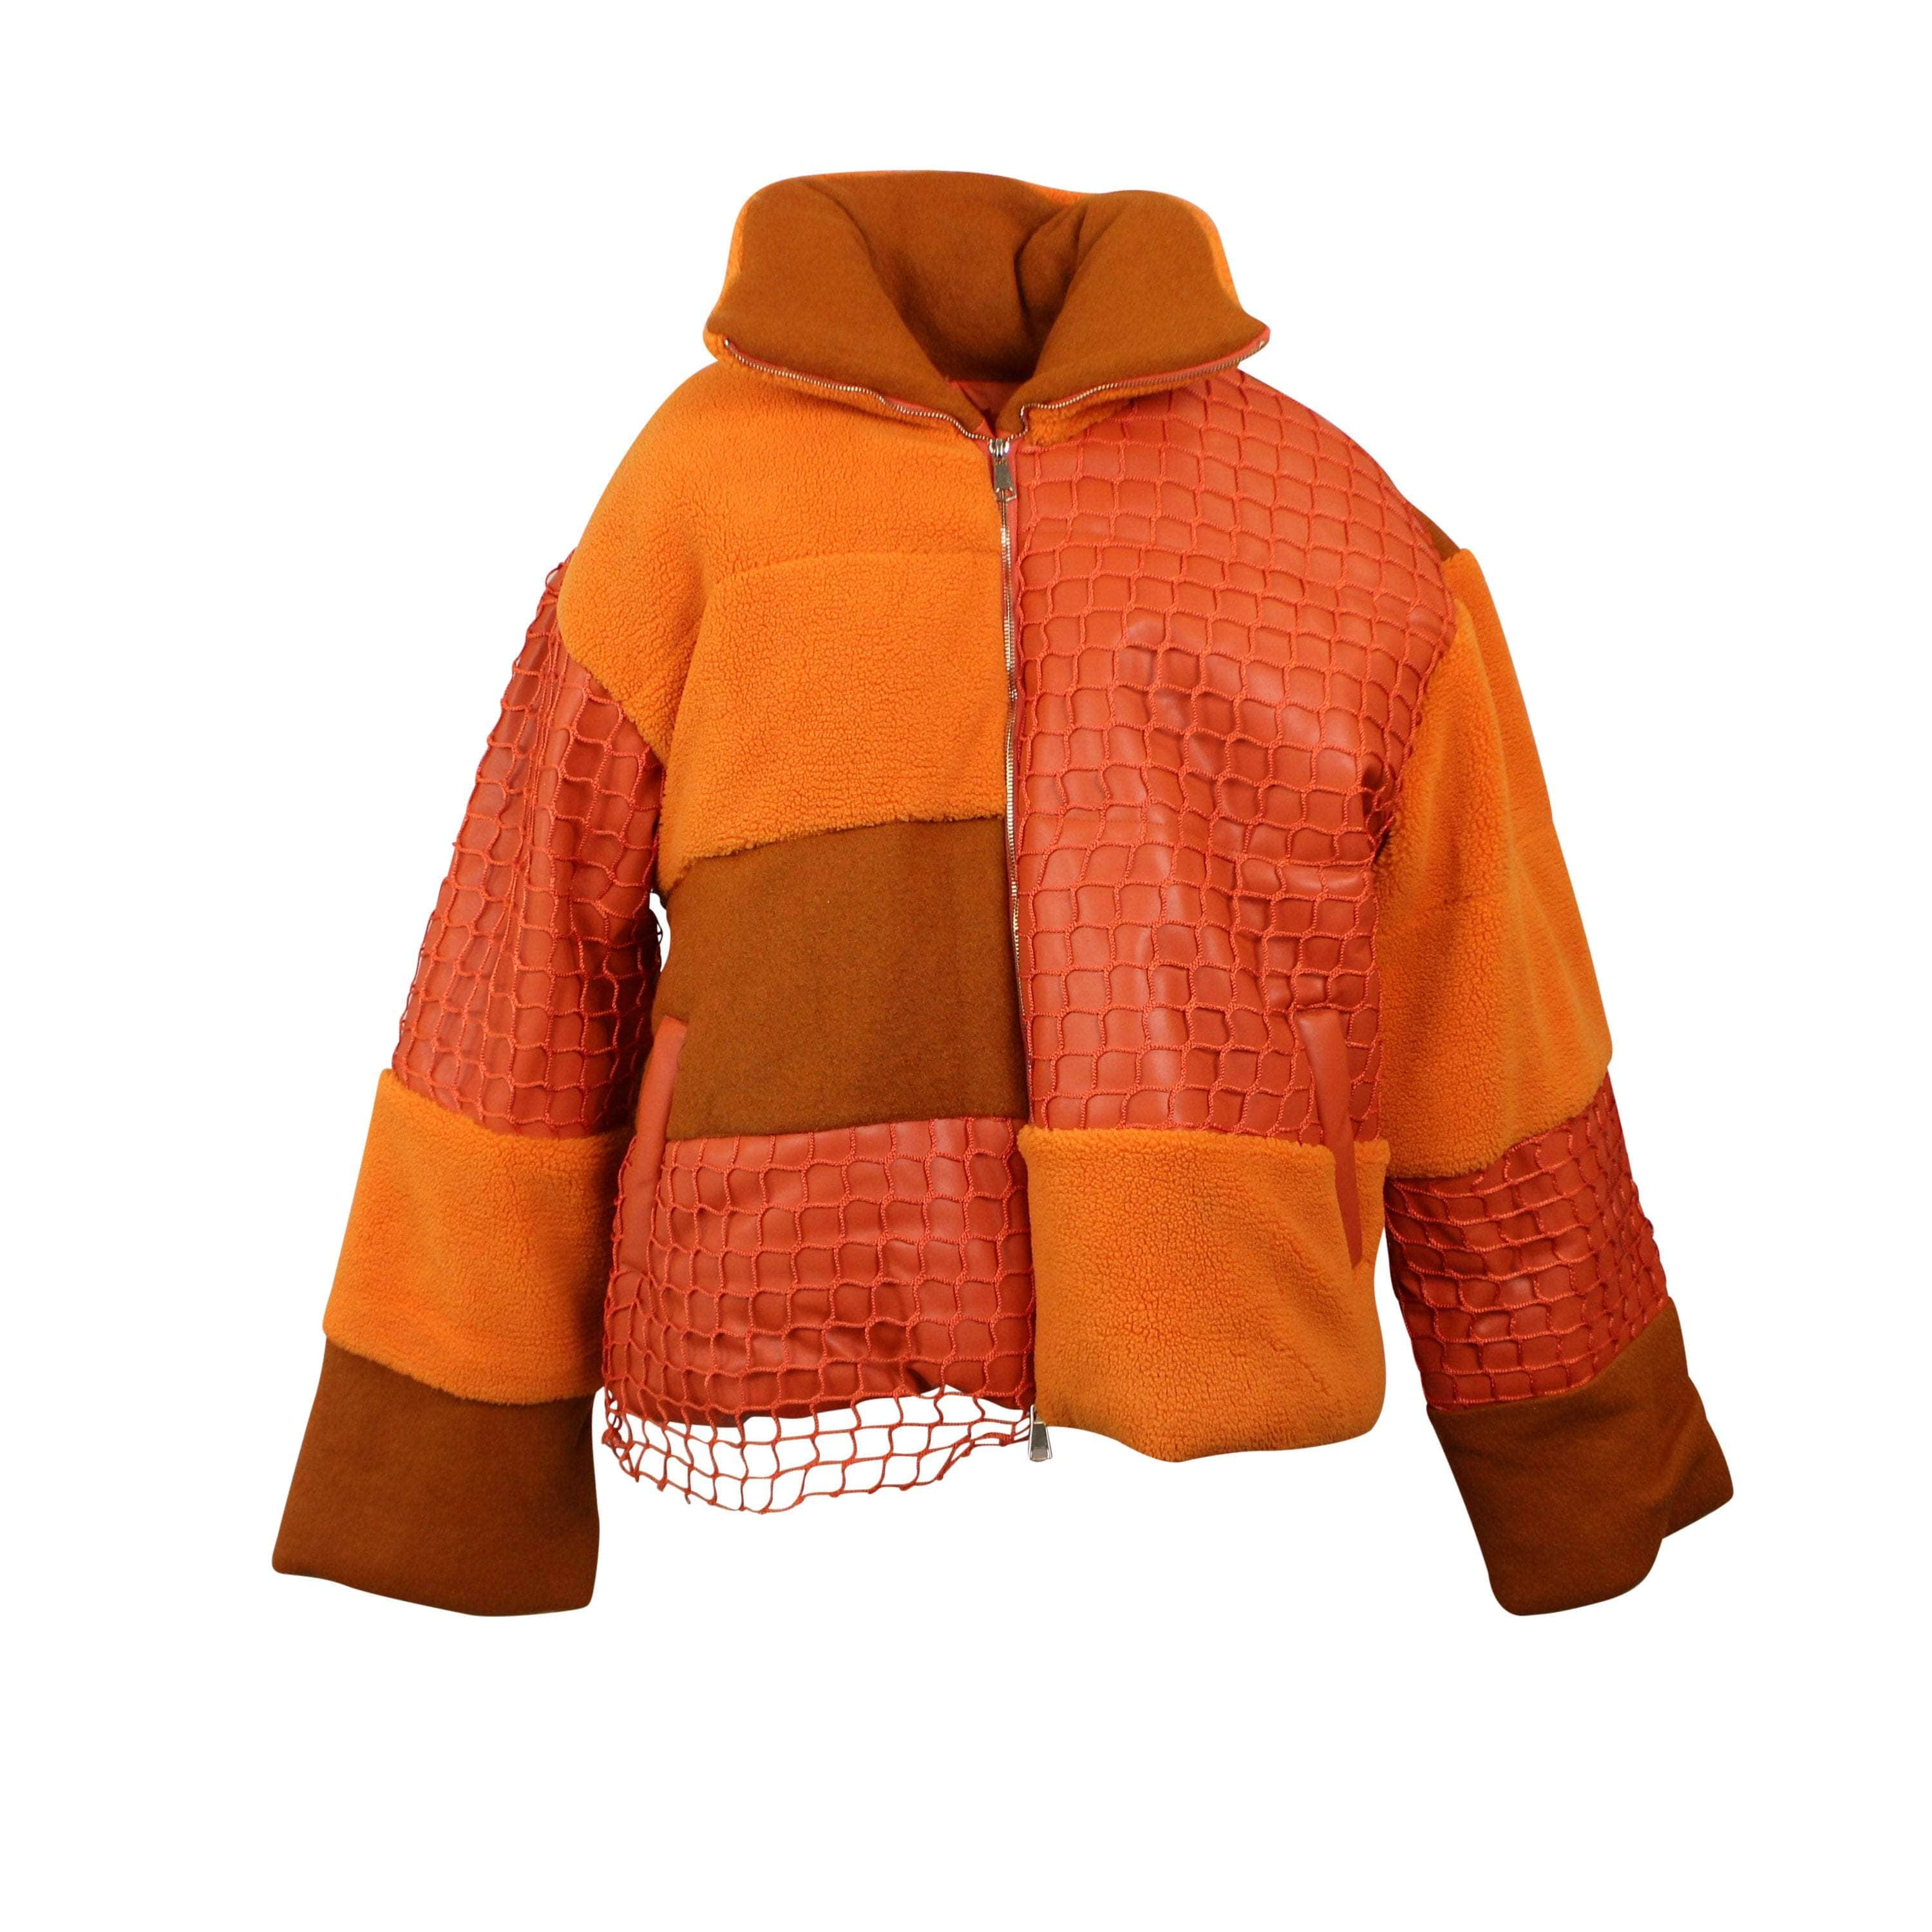 Who Decides War 1000-2000, channelenable-all, chicmi, couponcollection, main-clothing, mens-down-puffer-jackets, shop375, who-decides-war Tangerine Birds Eye View Landscape Puffer